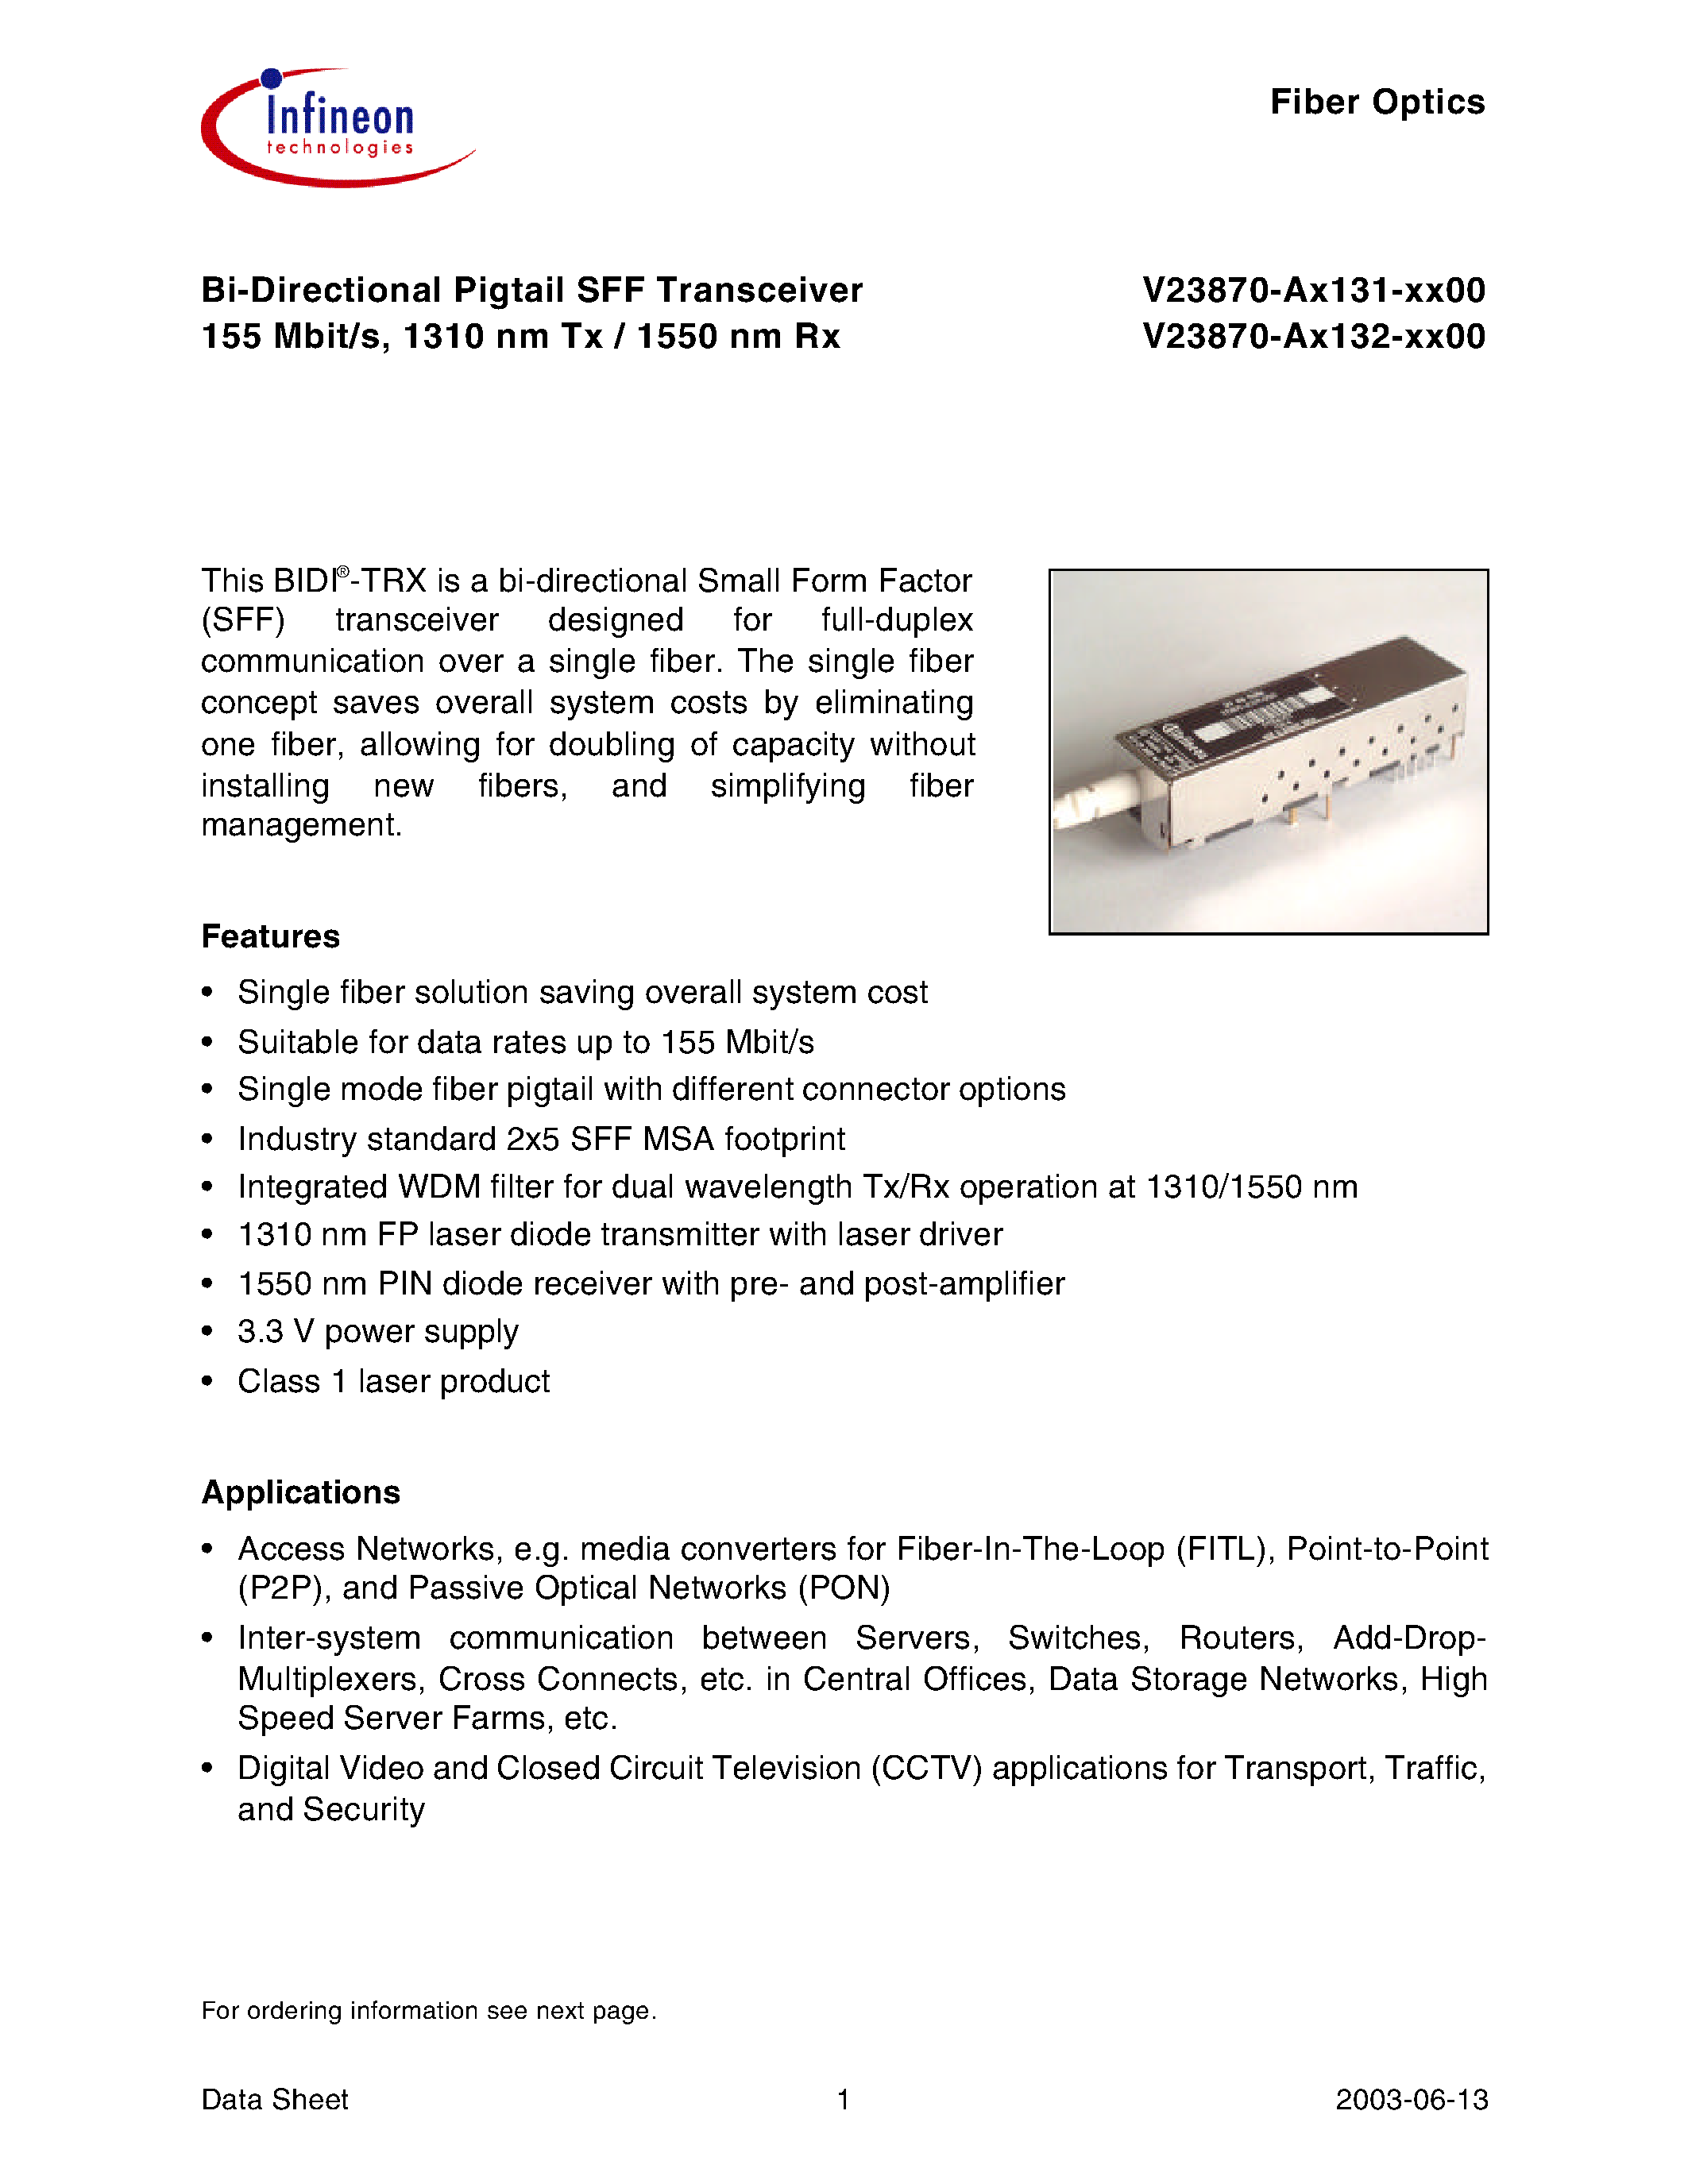 Datasheet V23870-A1131-C600 - Bi-Directional Pigtail SFF Transceiver 155 Mbit/s/ 1310 nm Tx / 1550 nm Rx page 1